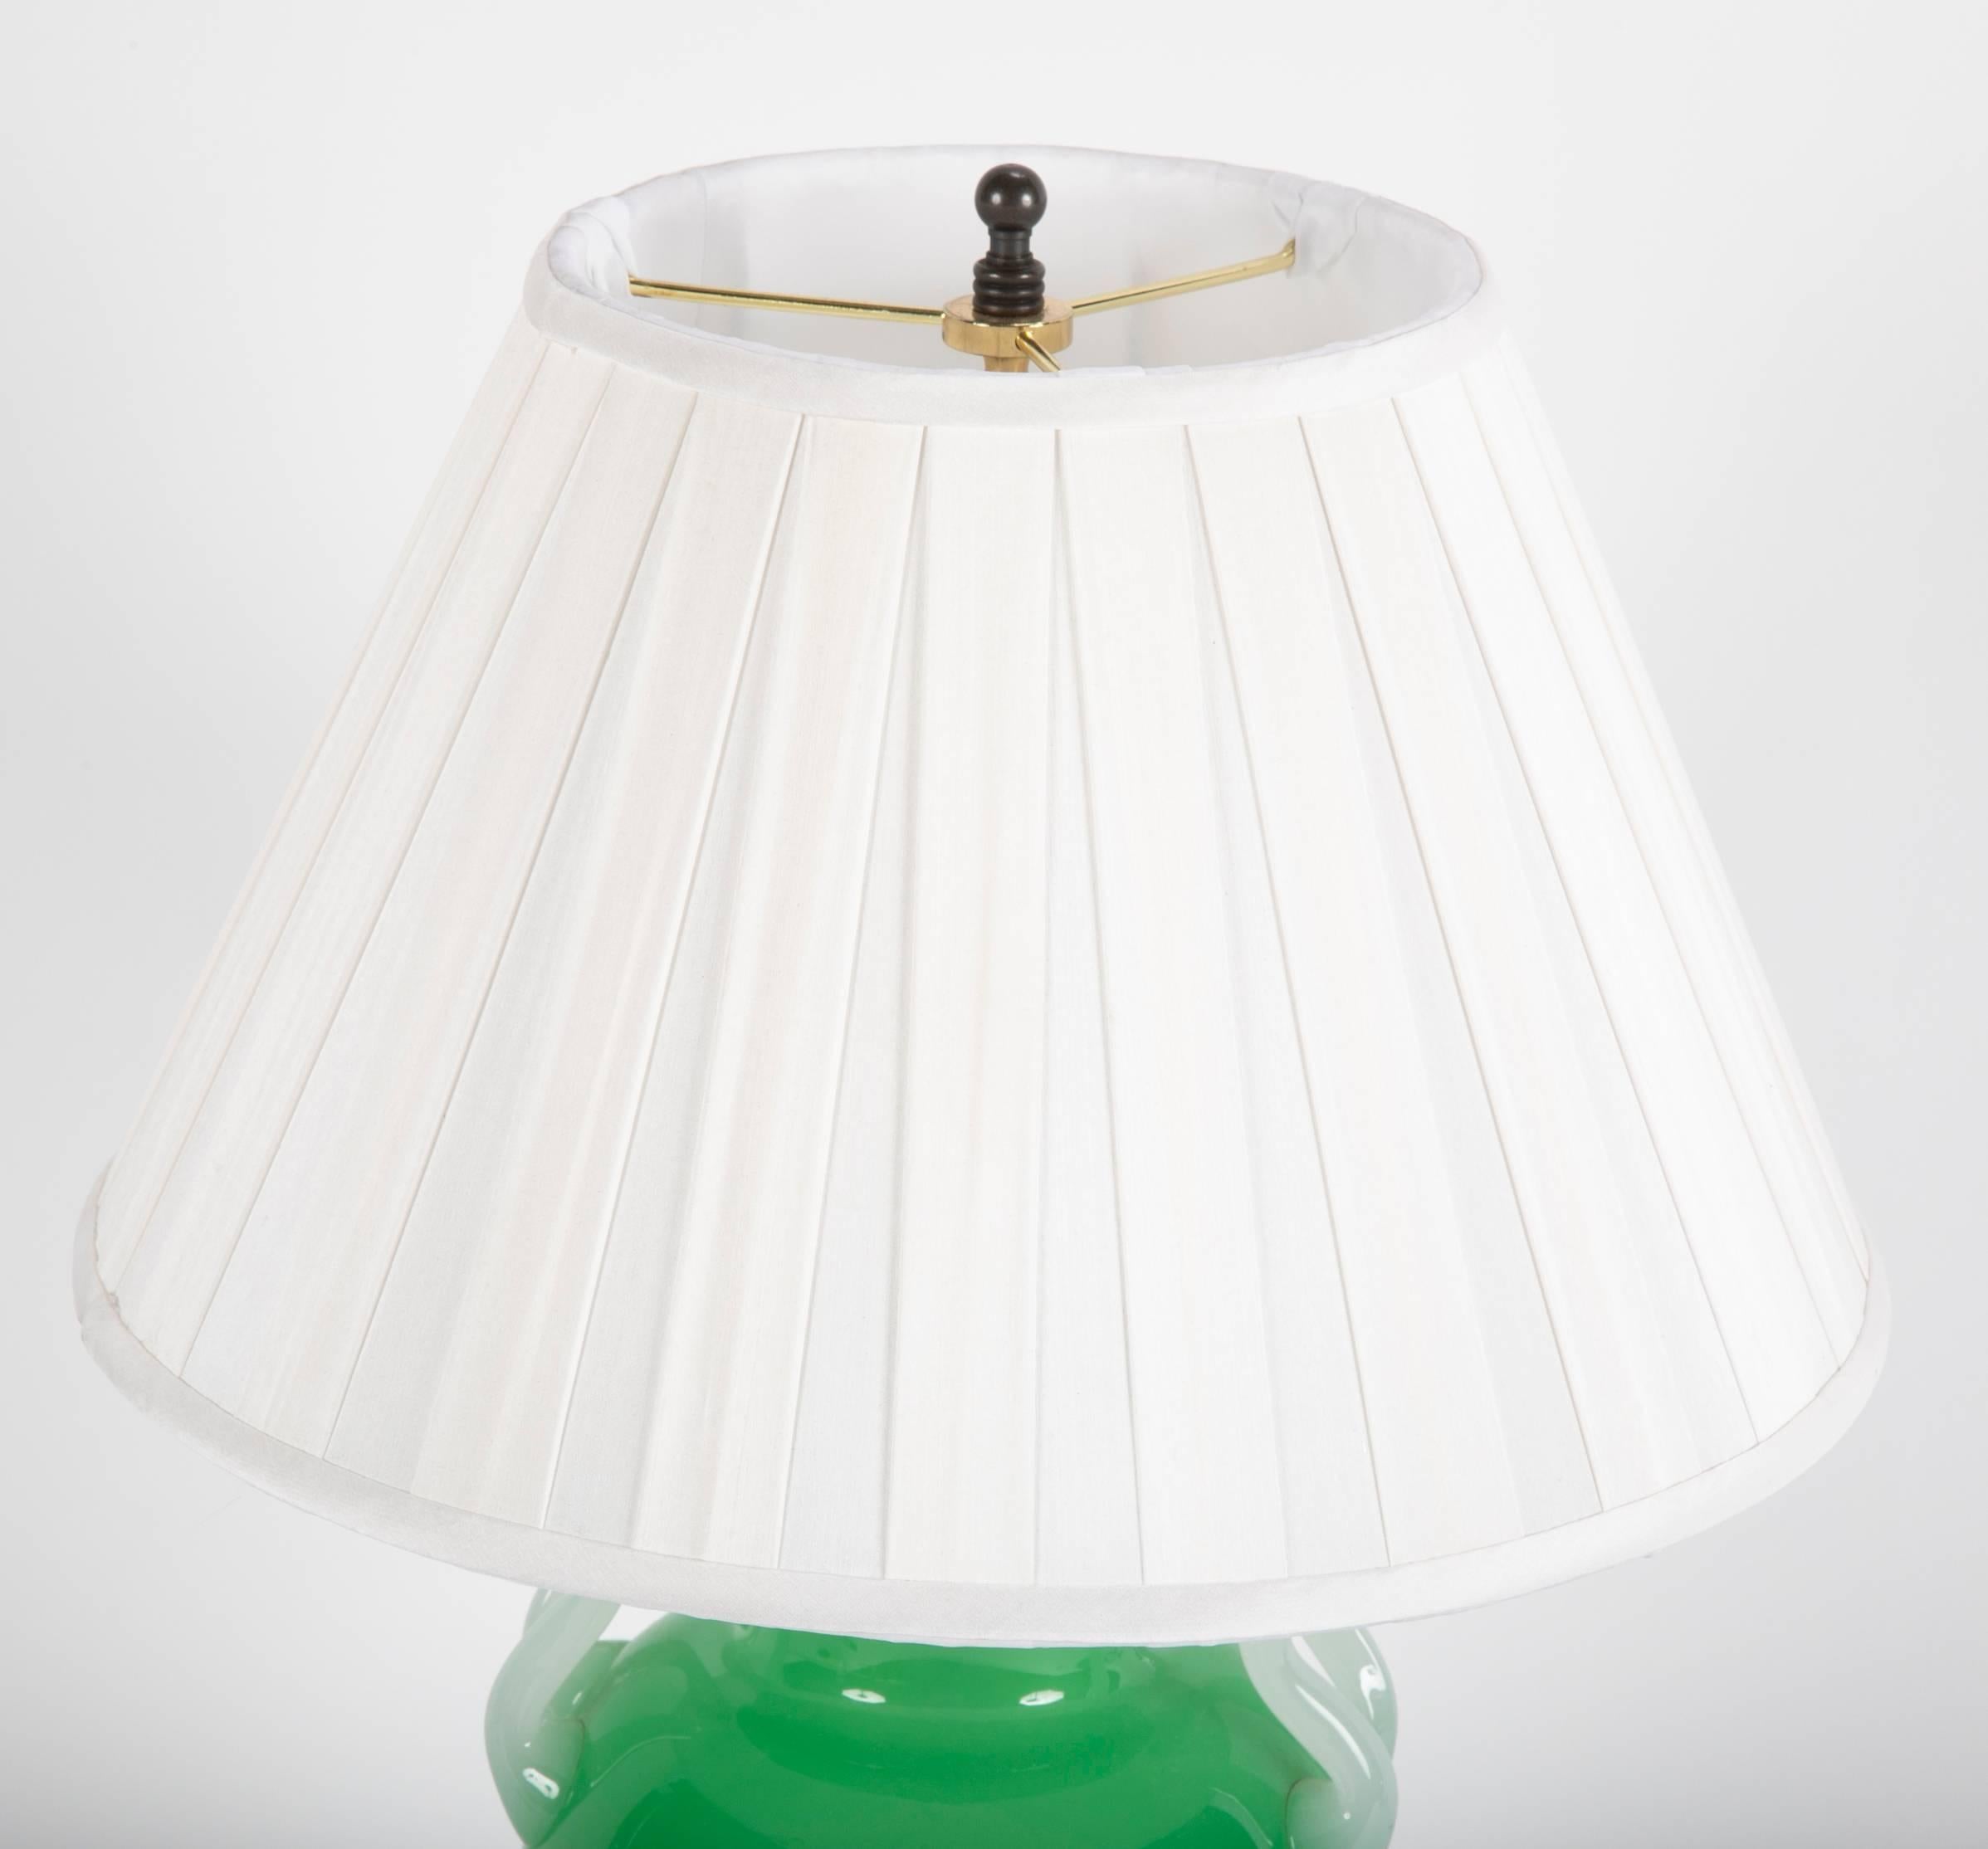 A jade green Steuben glass vase now electrified and mounted as a table lamp. Unsigned.